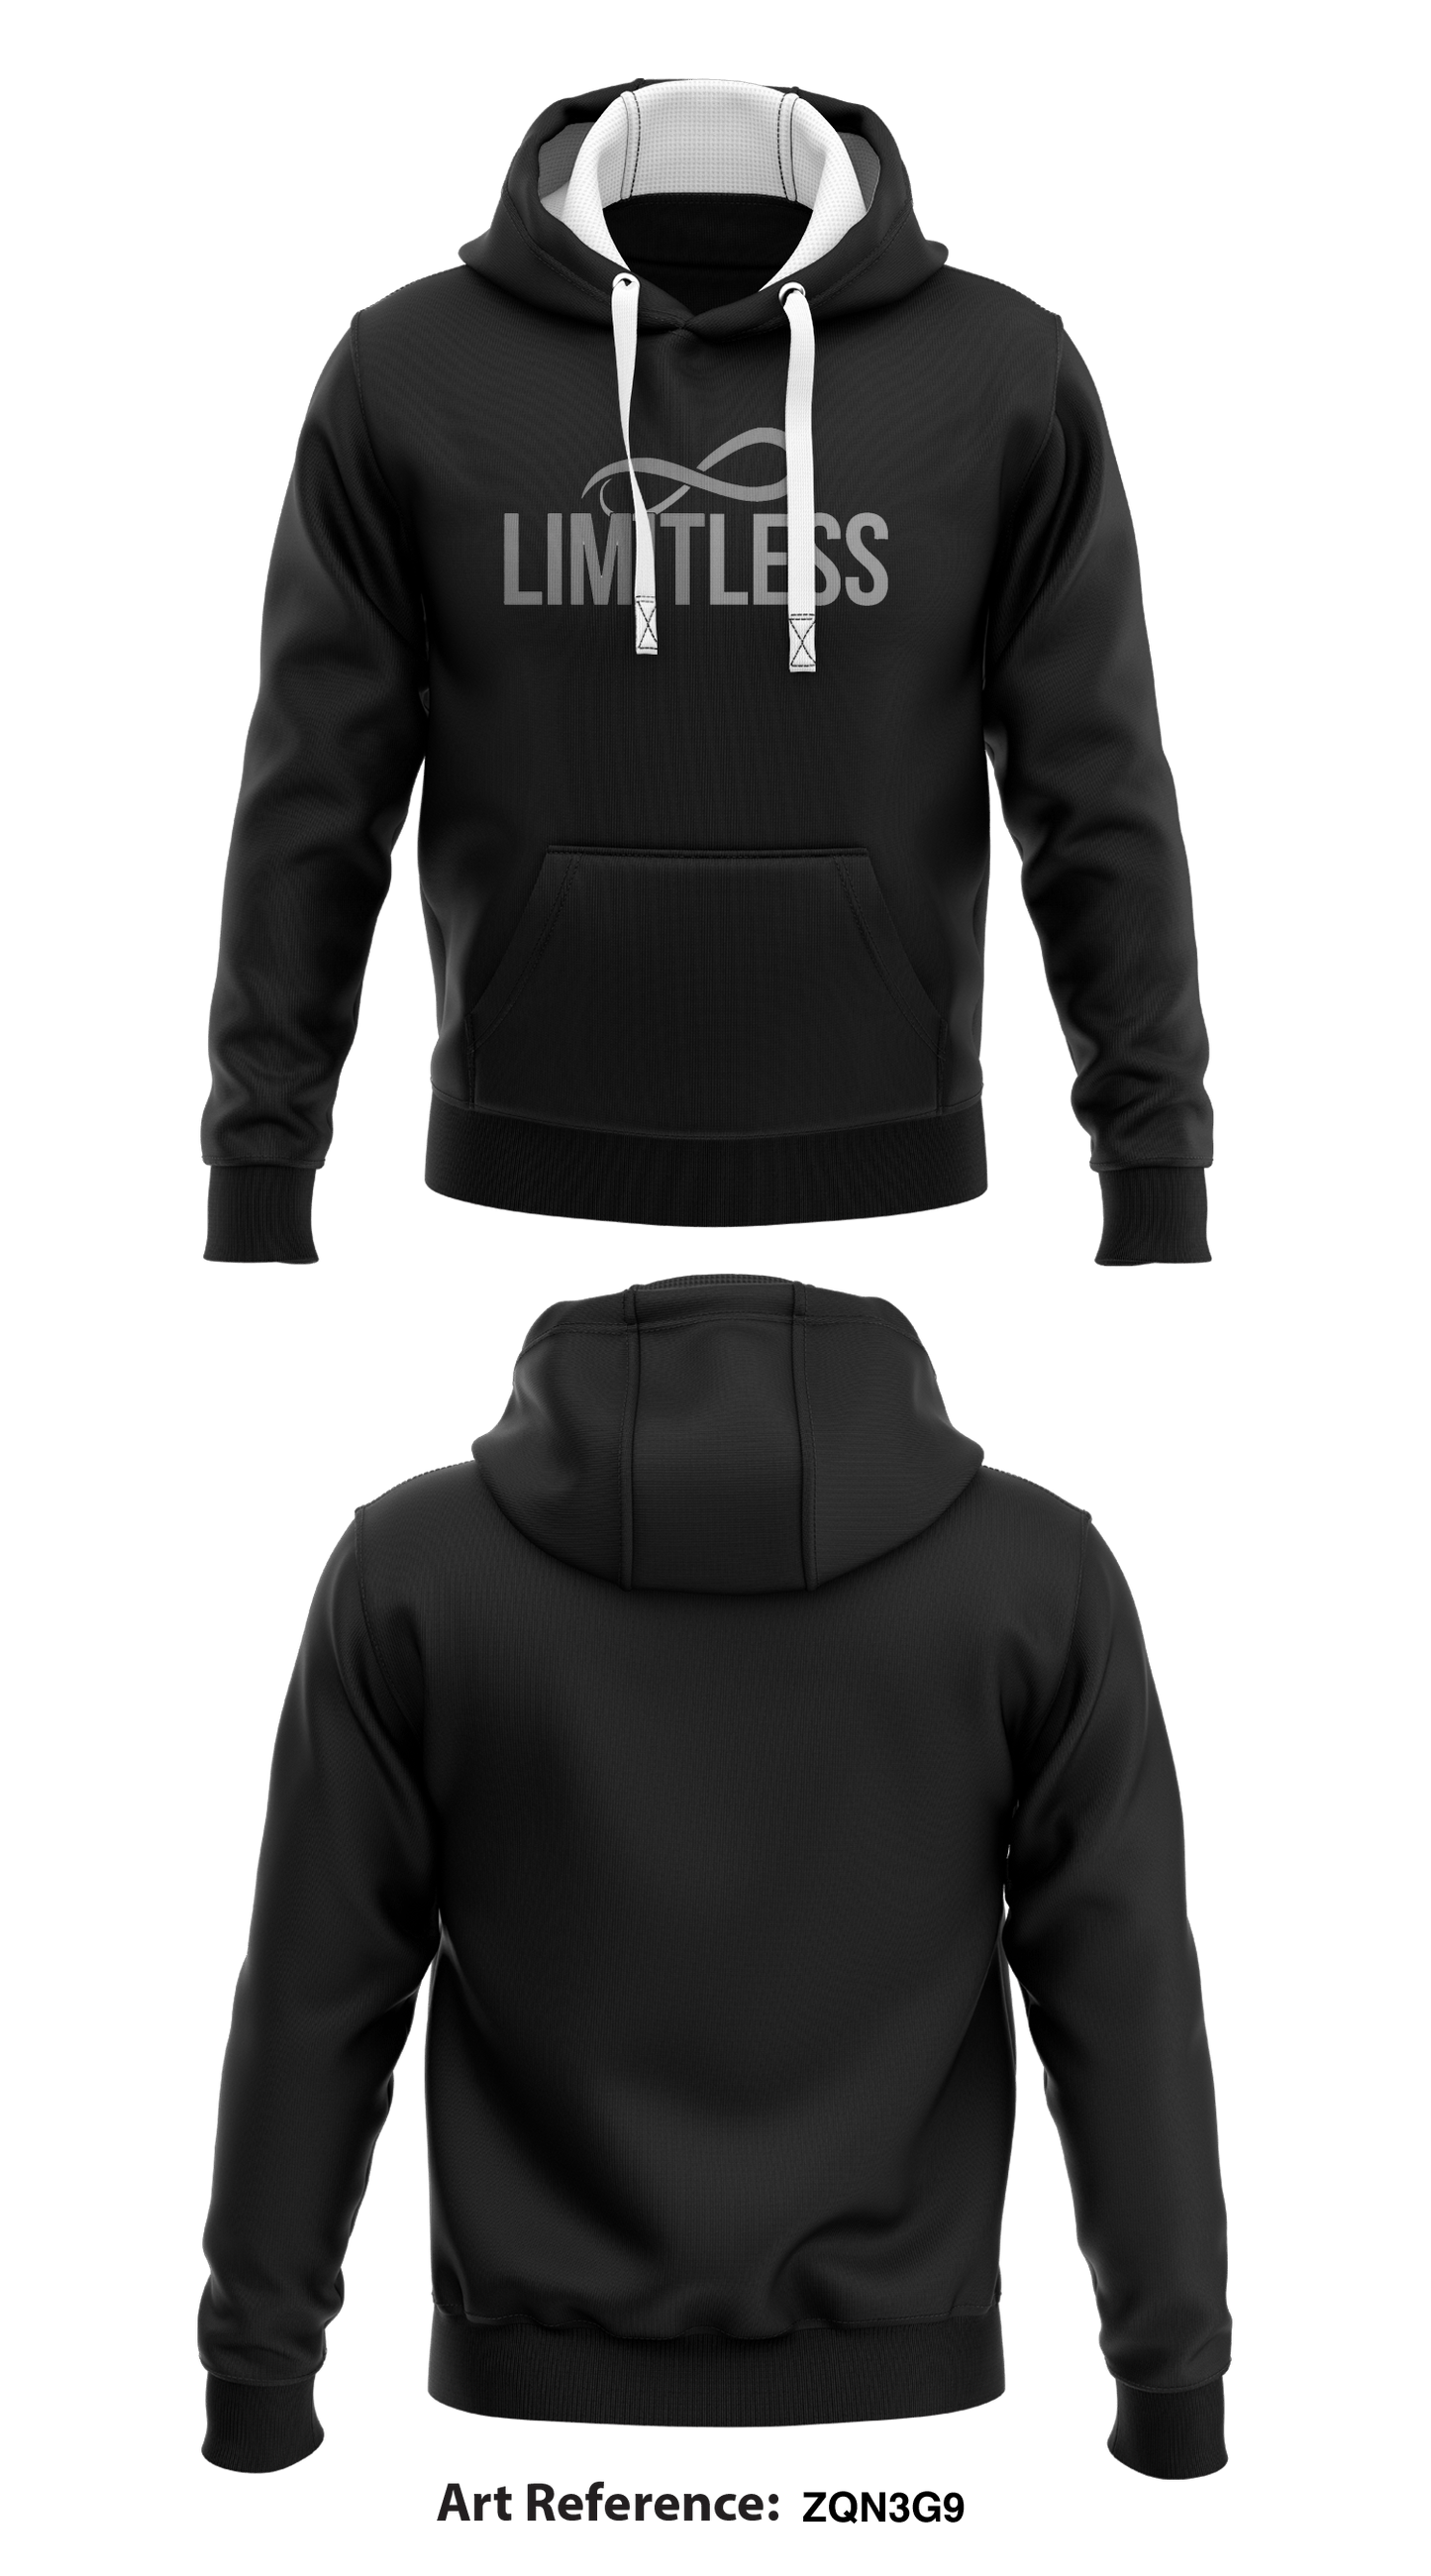 Limitless Collections Store 1  Core Men's Hooded Performance Sweatshirt - zQN3G9